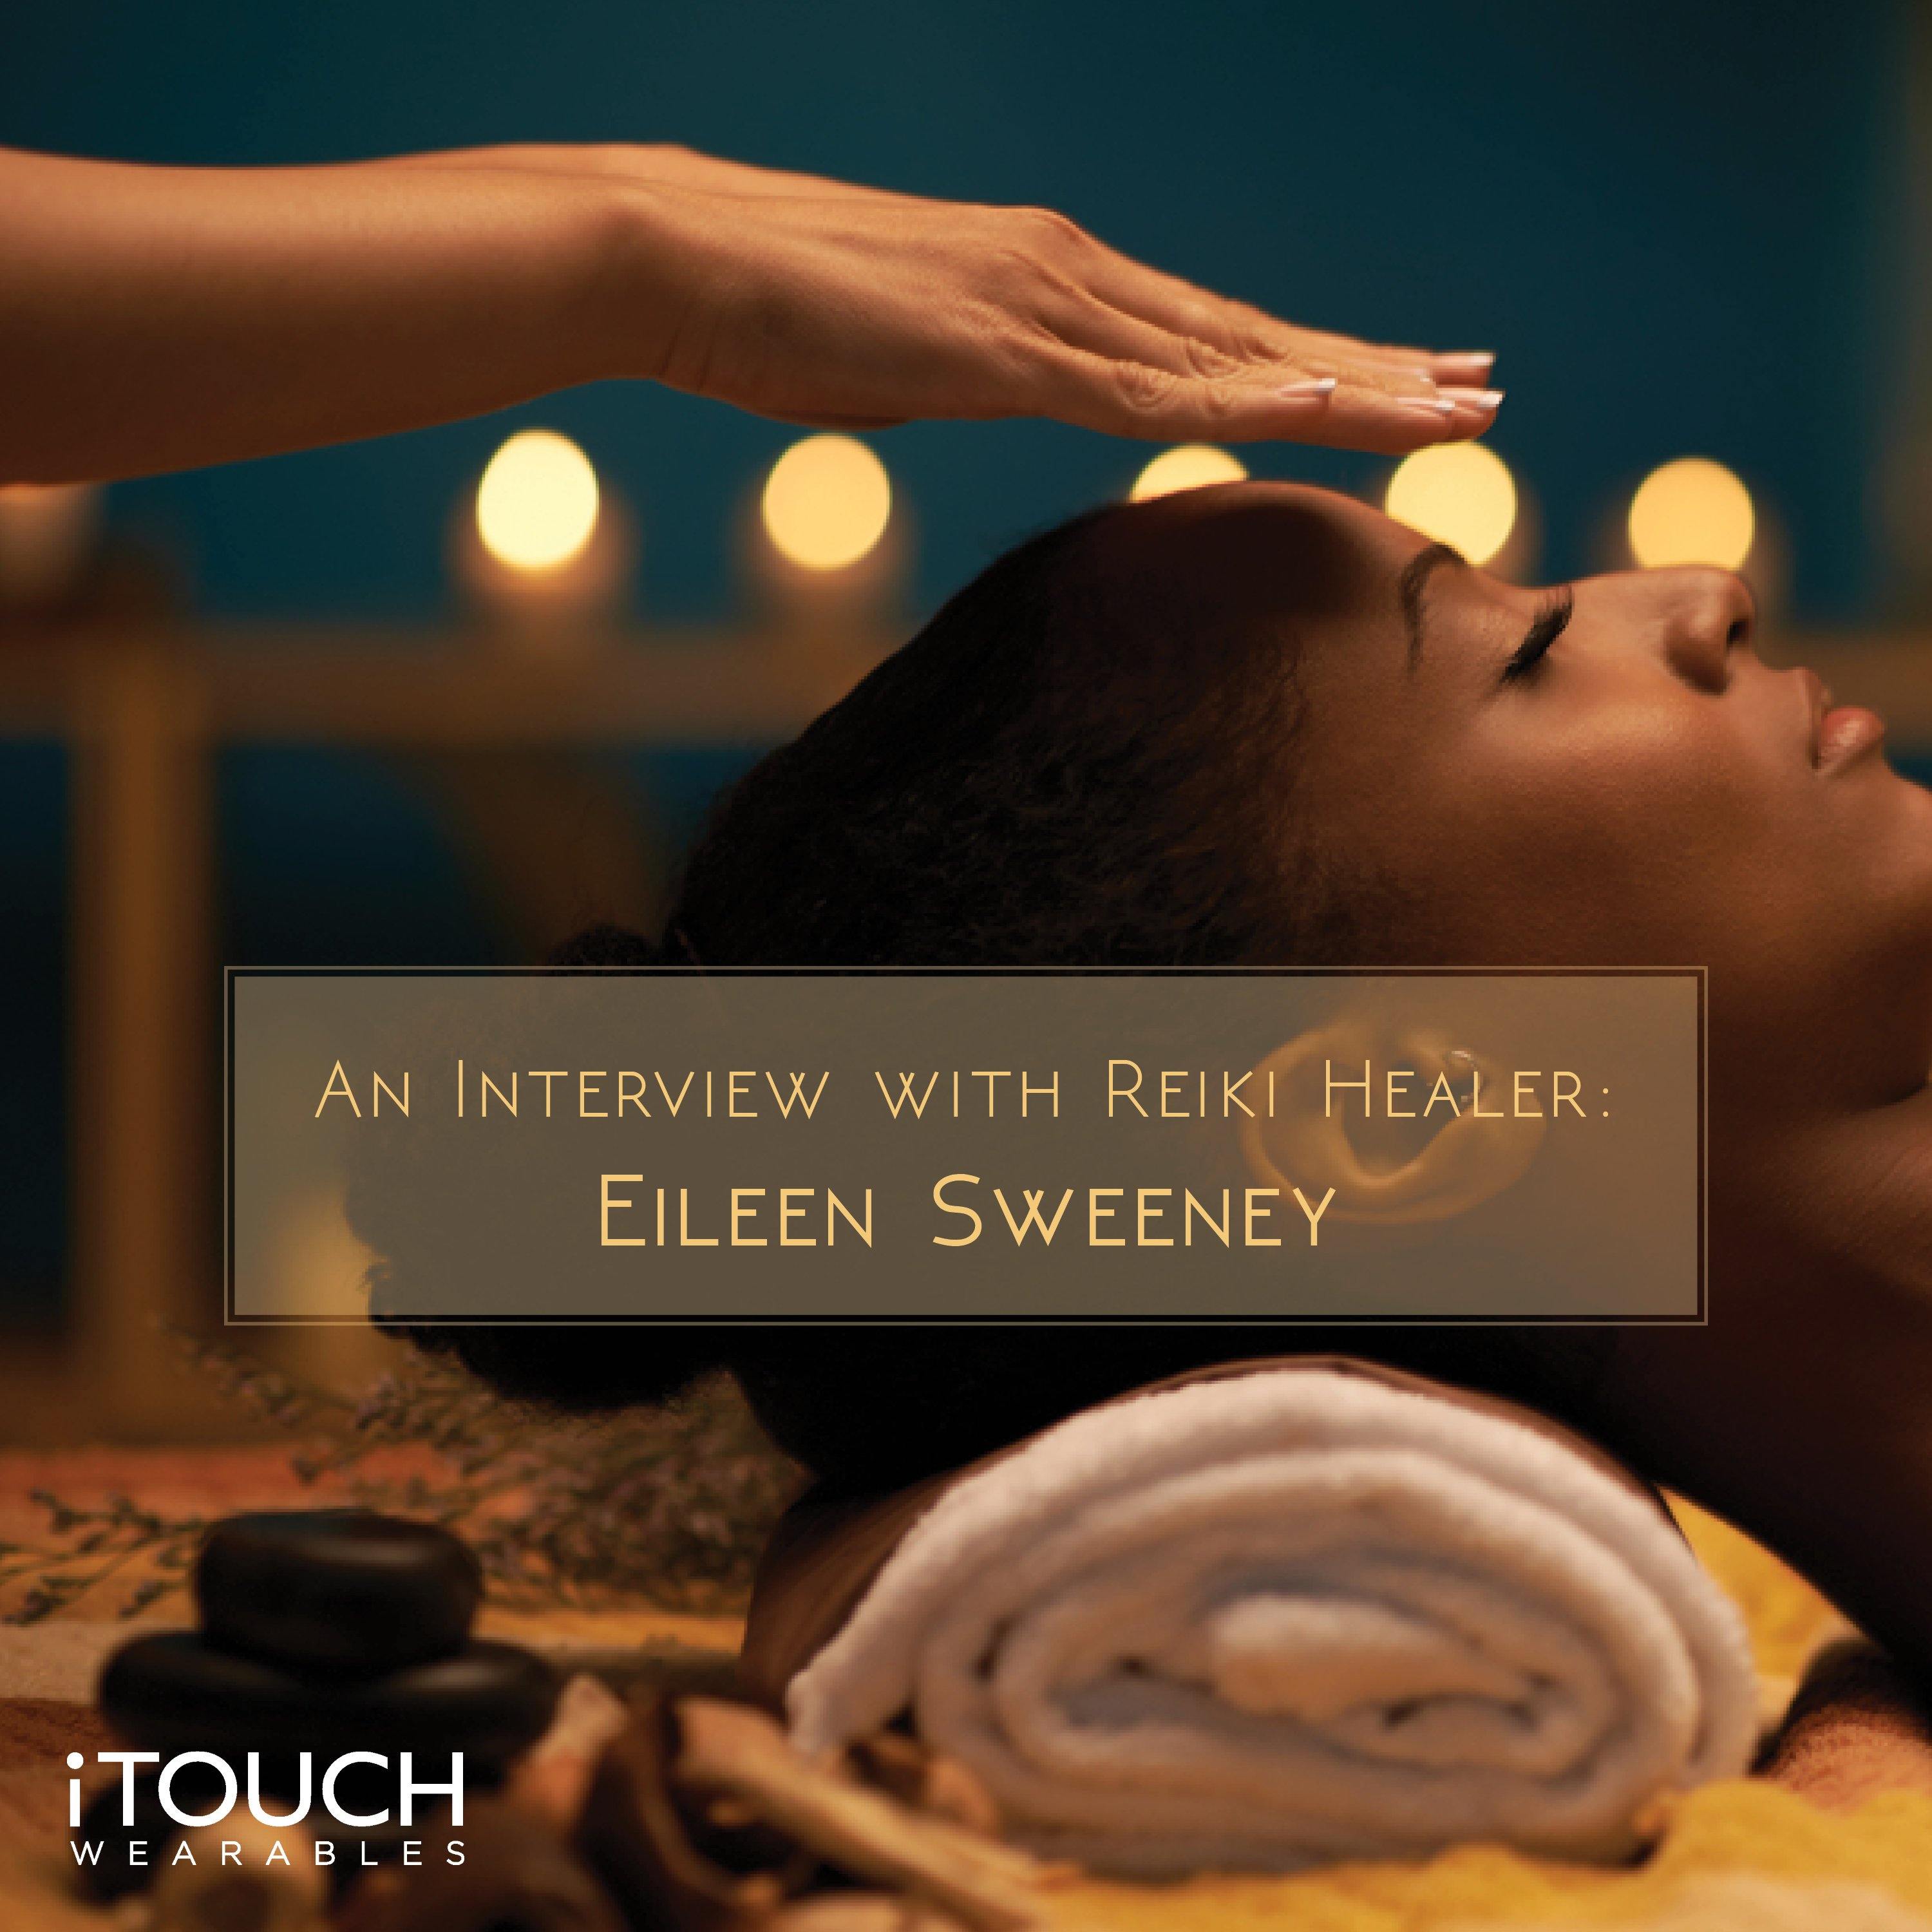 An Interview With Reiki Healer Eileen Sweeney - iTOUCH Wearables